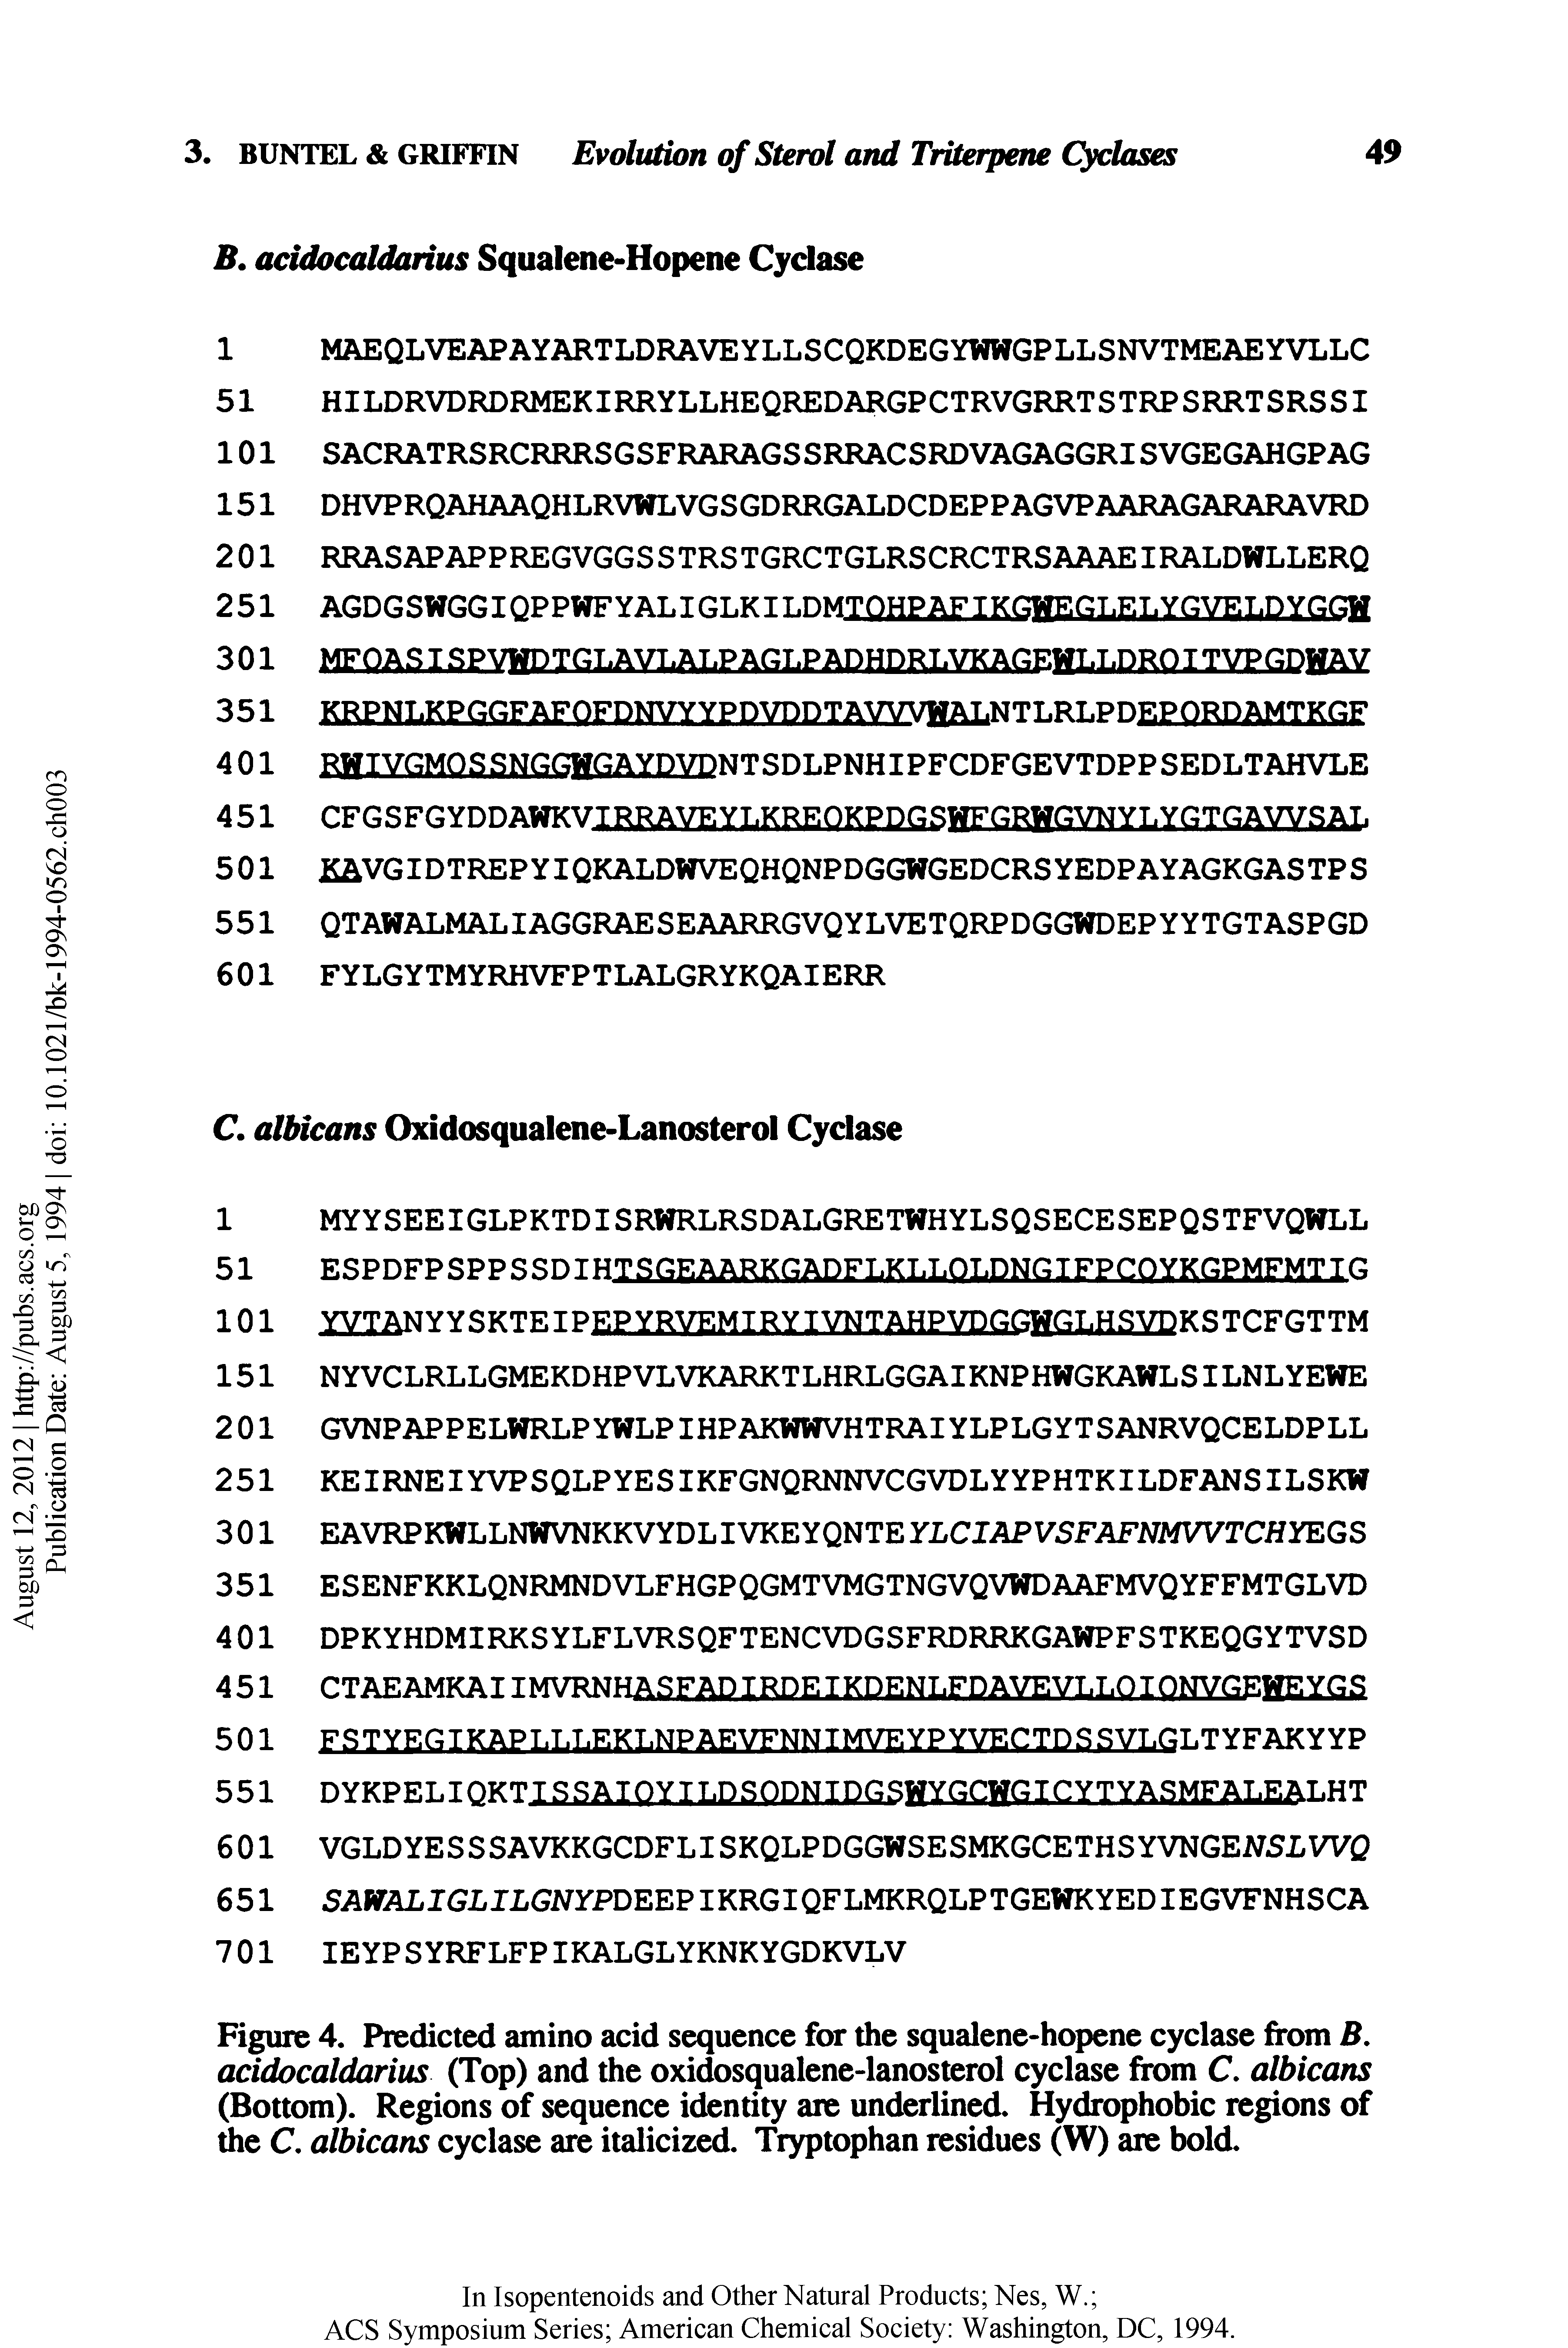 Figure 4. Predicted amino acid sequence for the squalene-hopene cyclase from B. acidocaldarius (Top) and the oxidosqualene-lanosterol cyclase from C. albicans (Bottom). Regions of sequence identity are underlined. Hydrophobic regions of Ae C. albicans cyclase are italicized. Tryptophan residues (W) are bold.